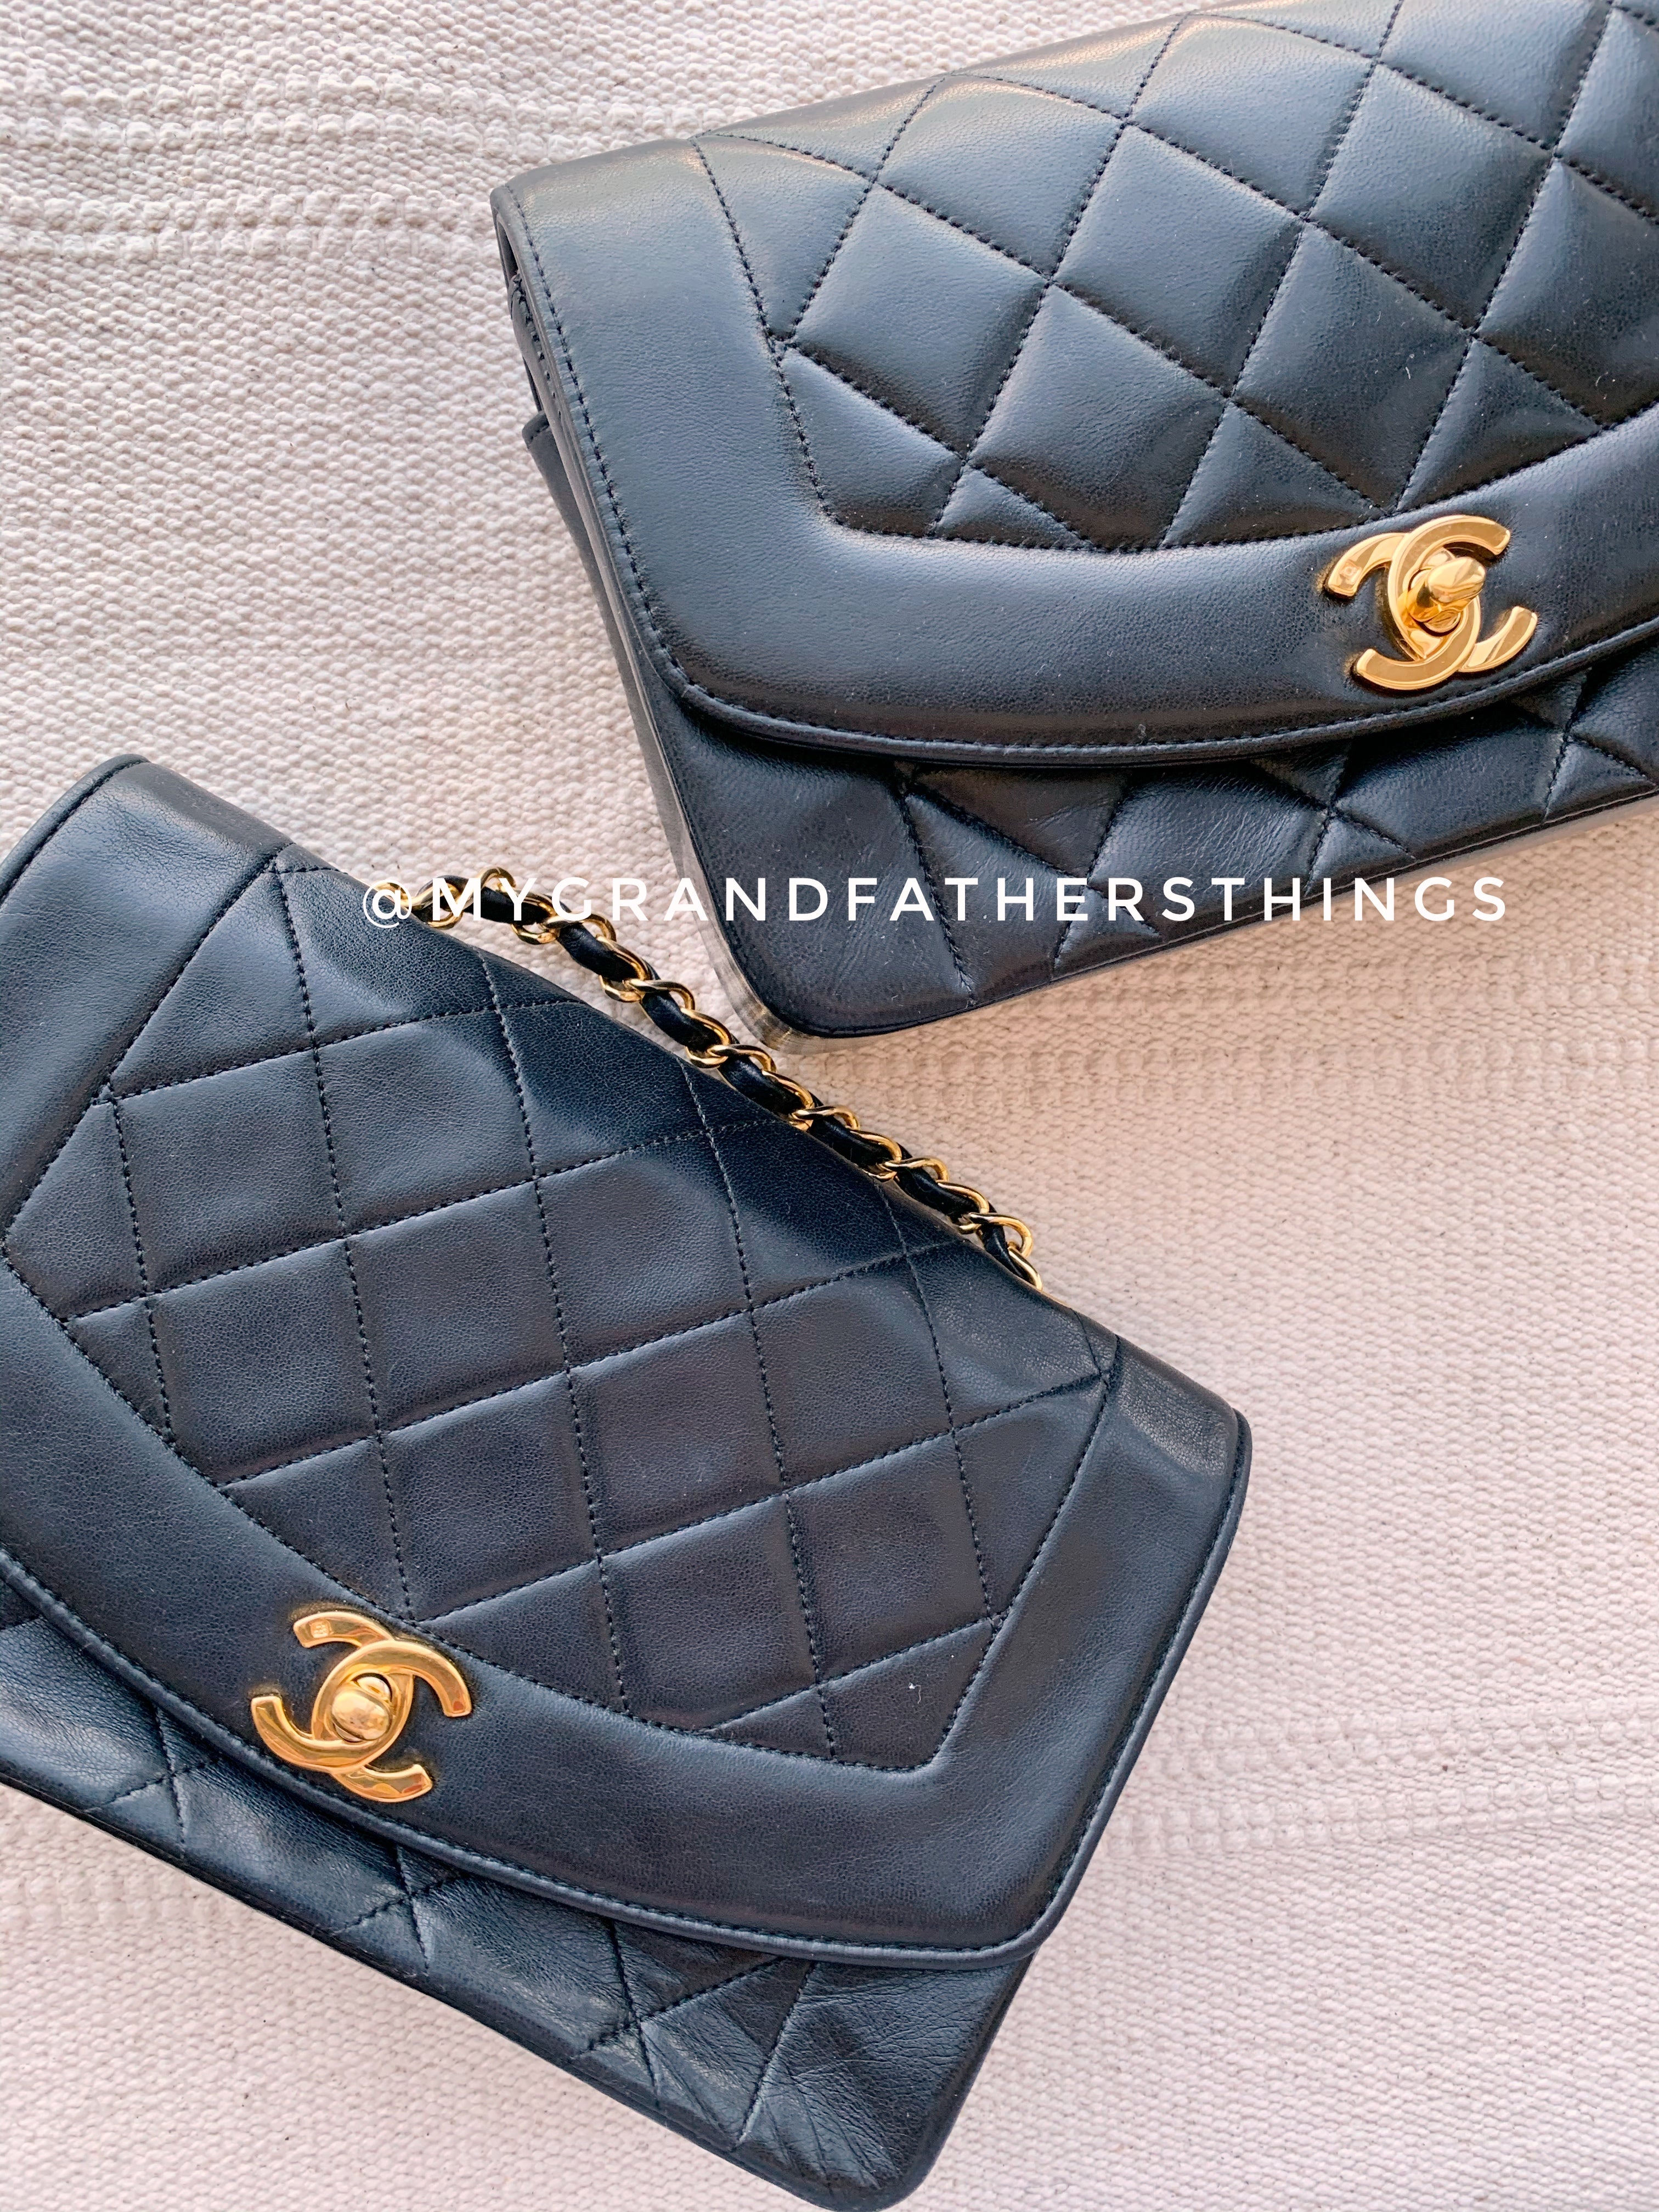 Vintage Chanel Diana: the original design – My Grandfather's Things